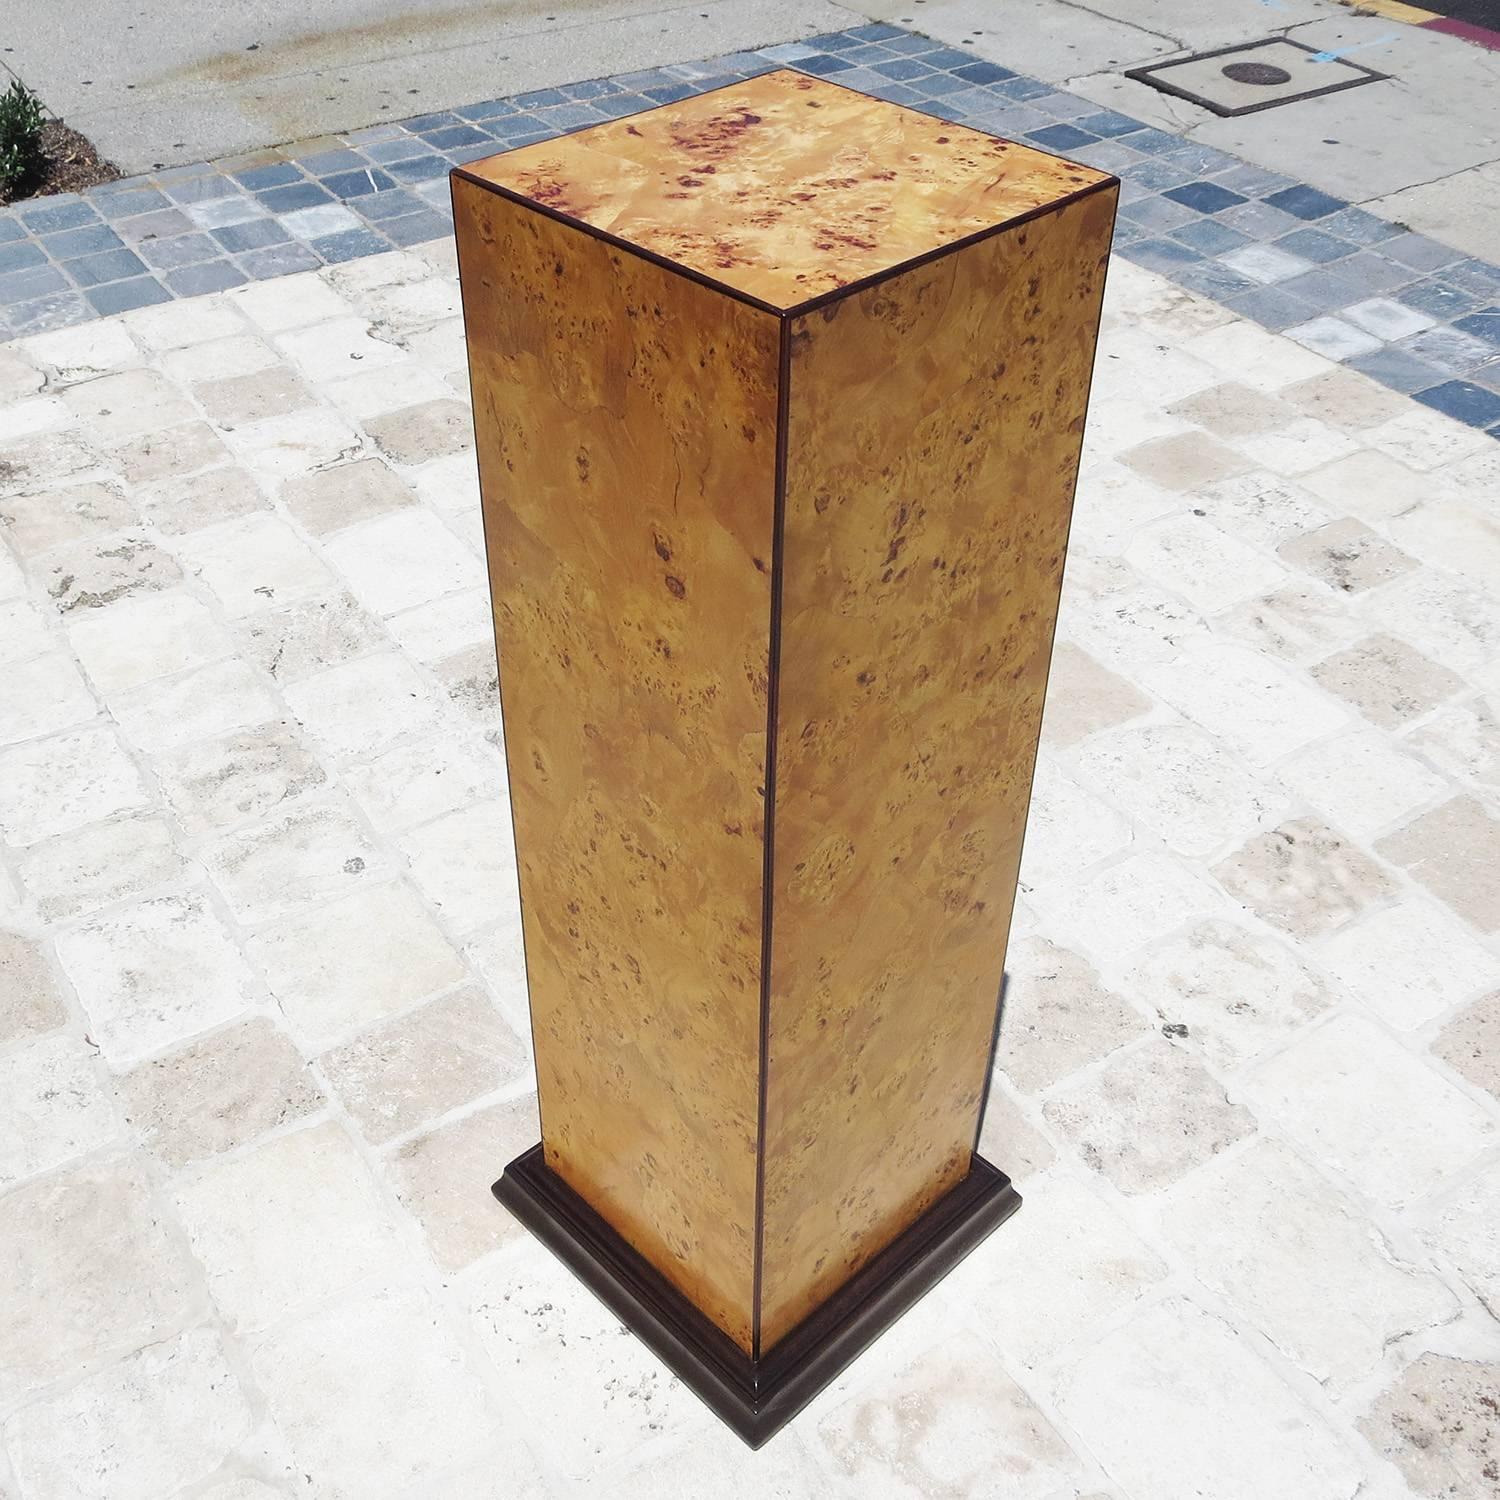 RETIREMENT SALE!!!  EVERYTHING MUST GO - CHECK OUT OUR OTHER ITEMS.

This lovely pedestal is also a small cabinet with a locking door. The exterior is a patchwork burl, and has been completely stripped and refinished. The interior is decorated with